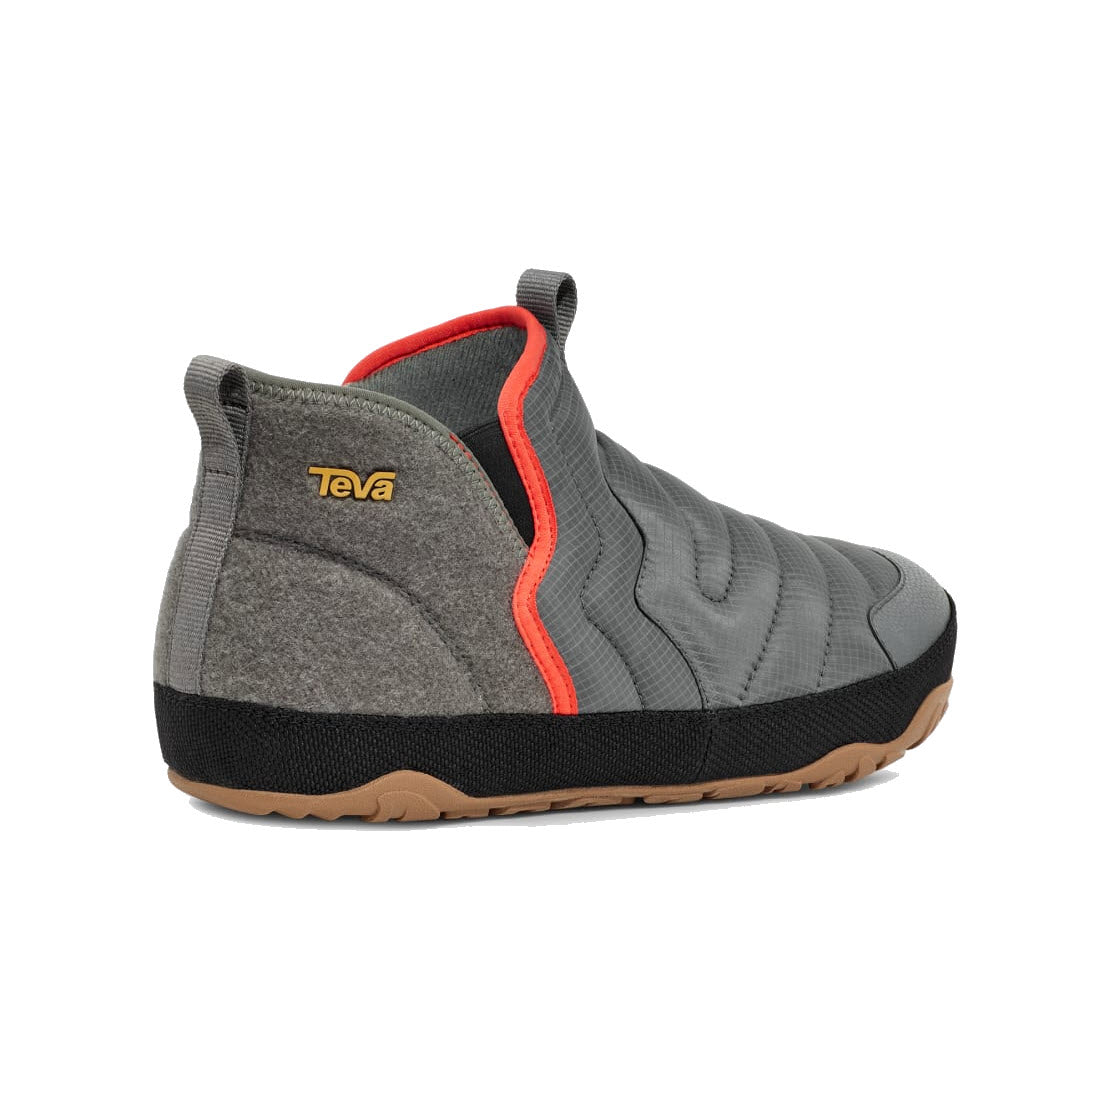 A Teva brand grey and black TEVA REEMBER TERRAIN MID SLIP ON SEDONA SAGE MULTI ankle boot with an orange detail on a white background.